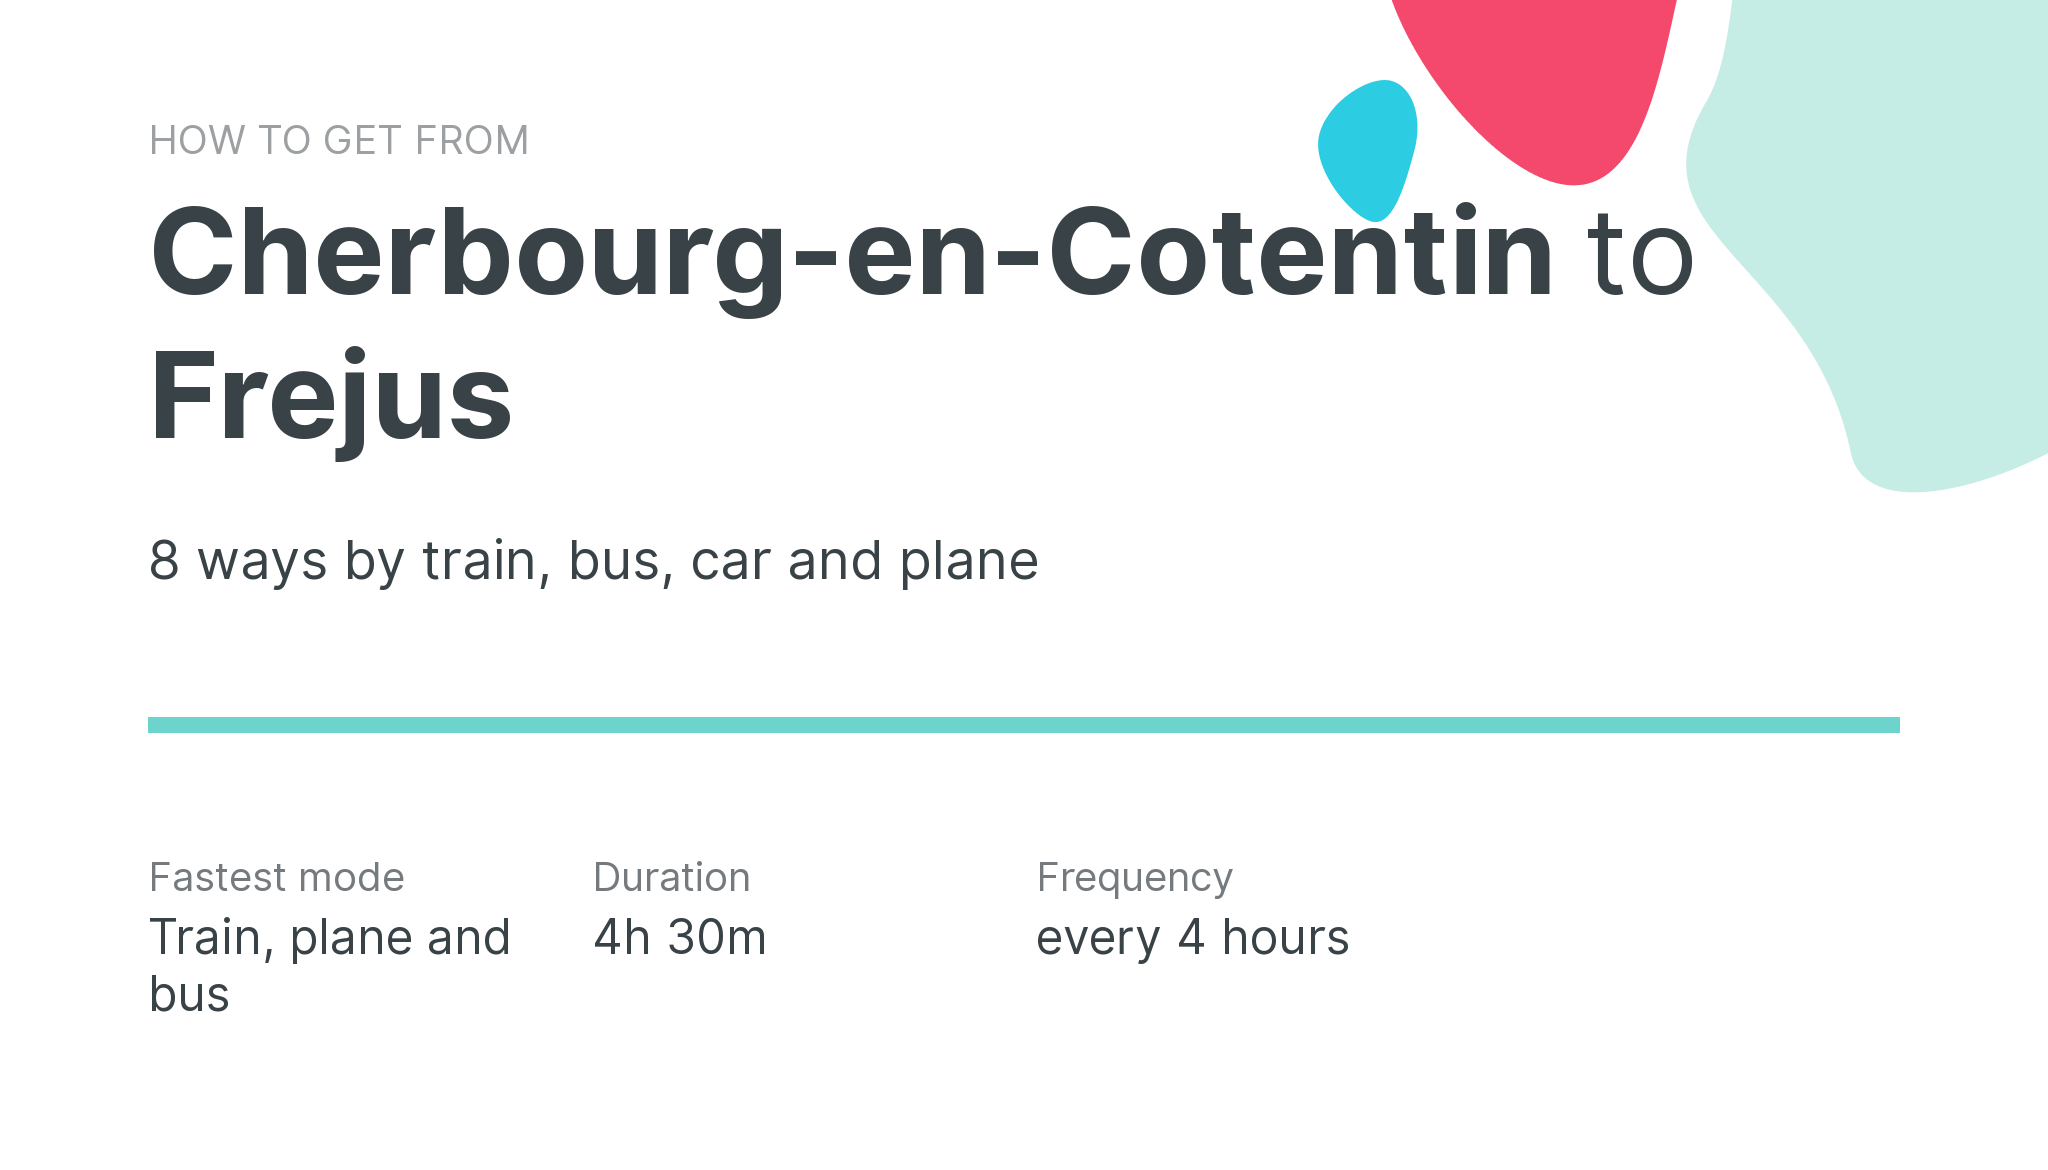 How do I get from Cherbourg-en-Cotentin to Frejus